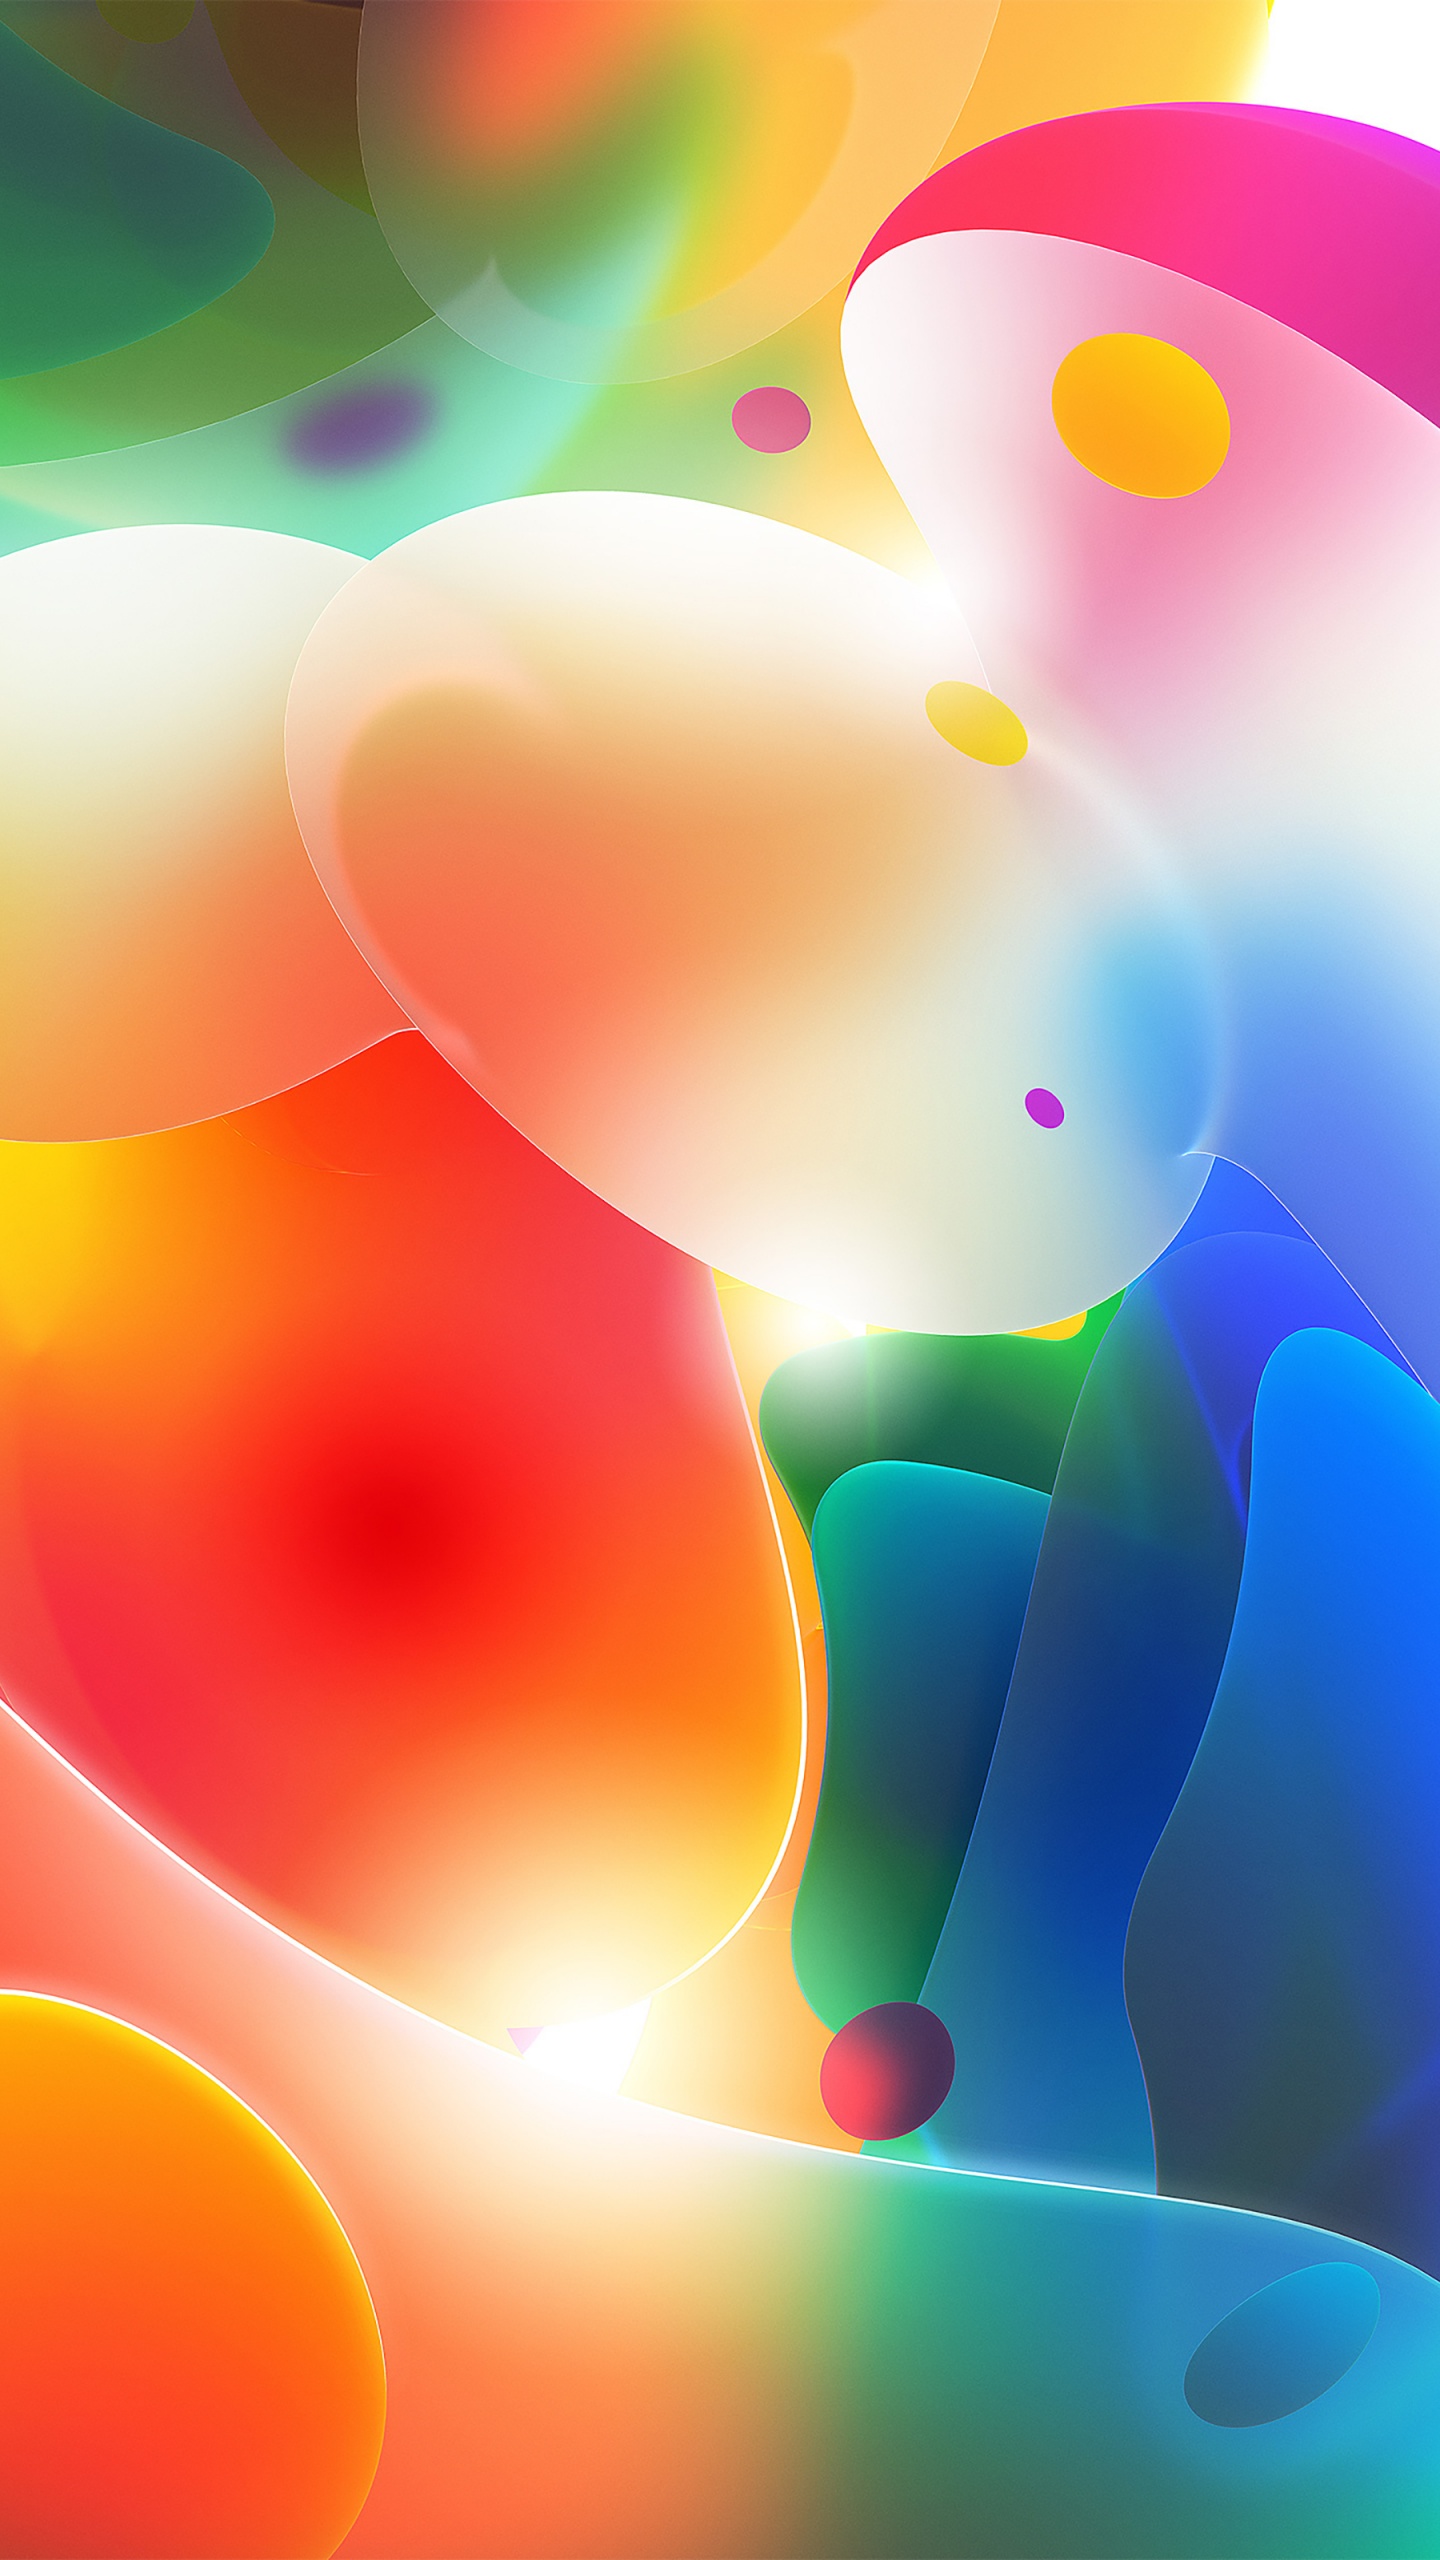 3D Wallpaper 4K, Gradients, Colorful, Abstract, #3567